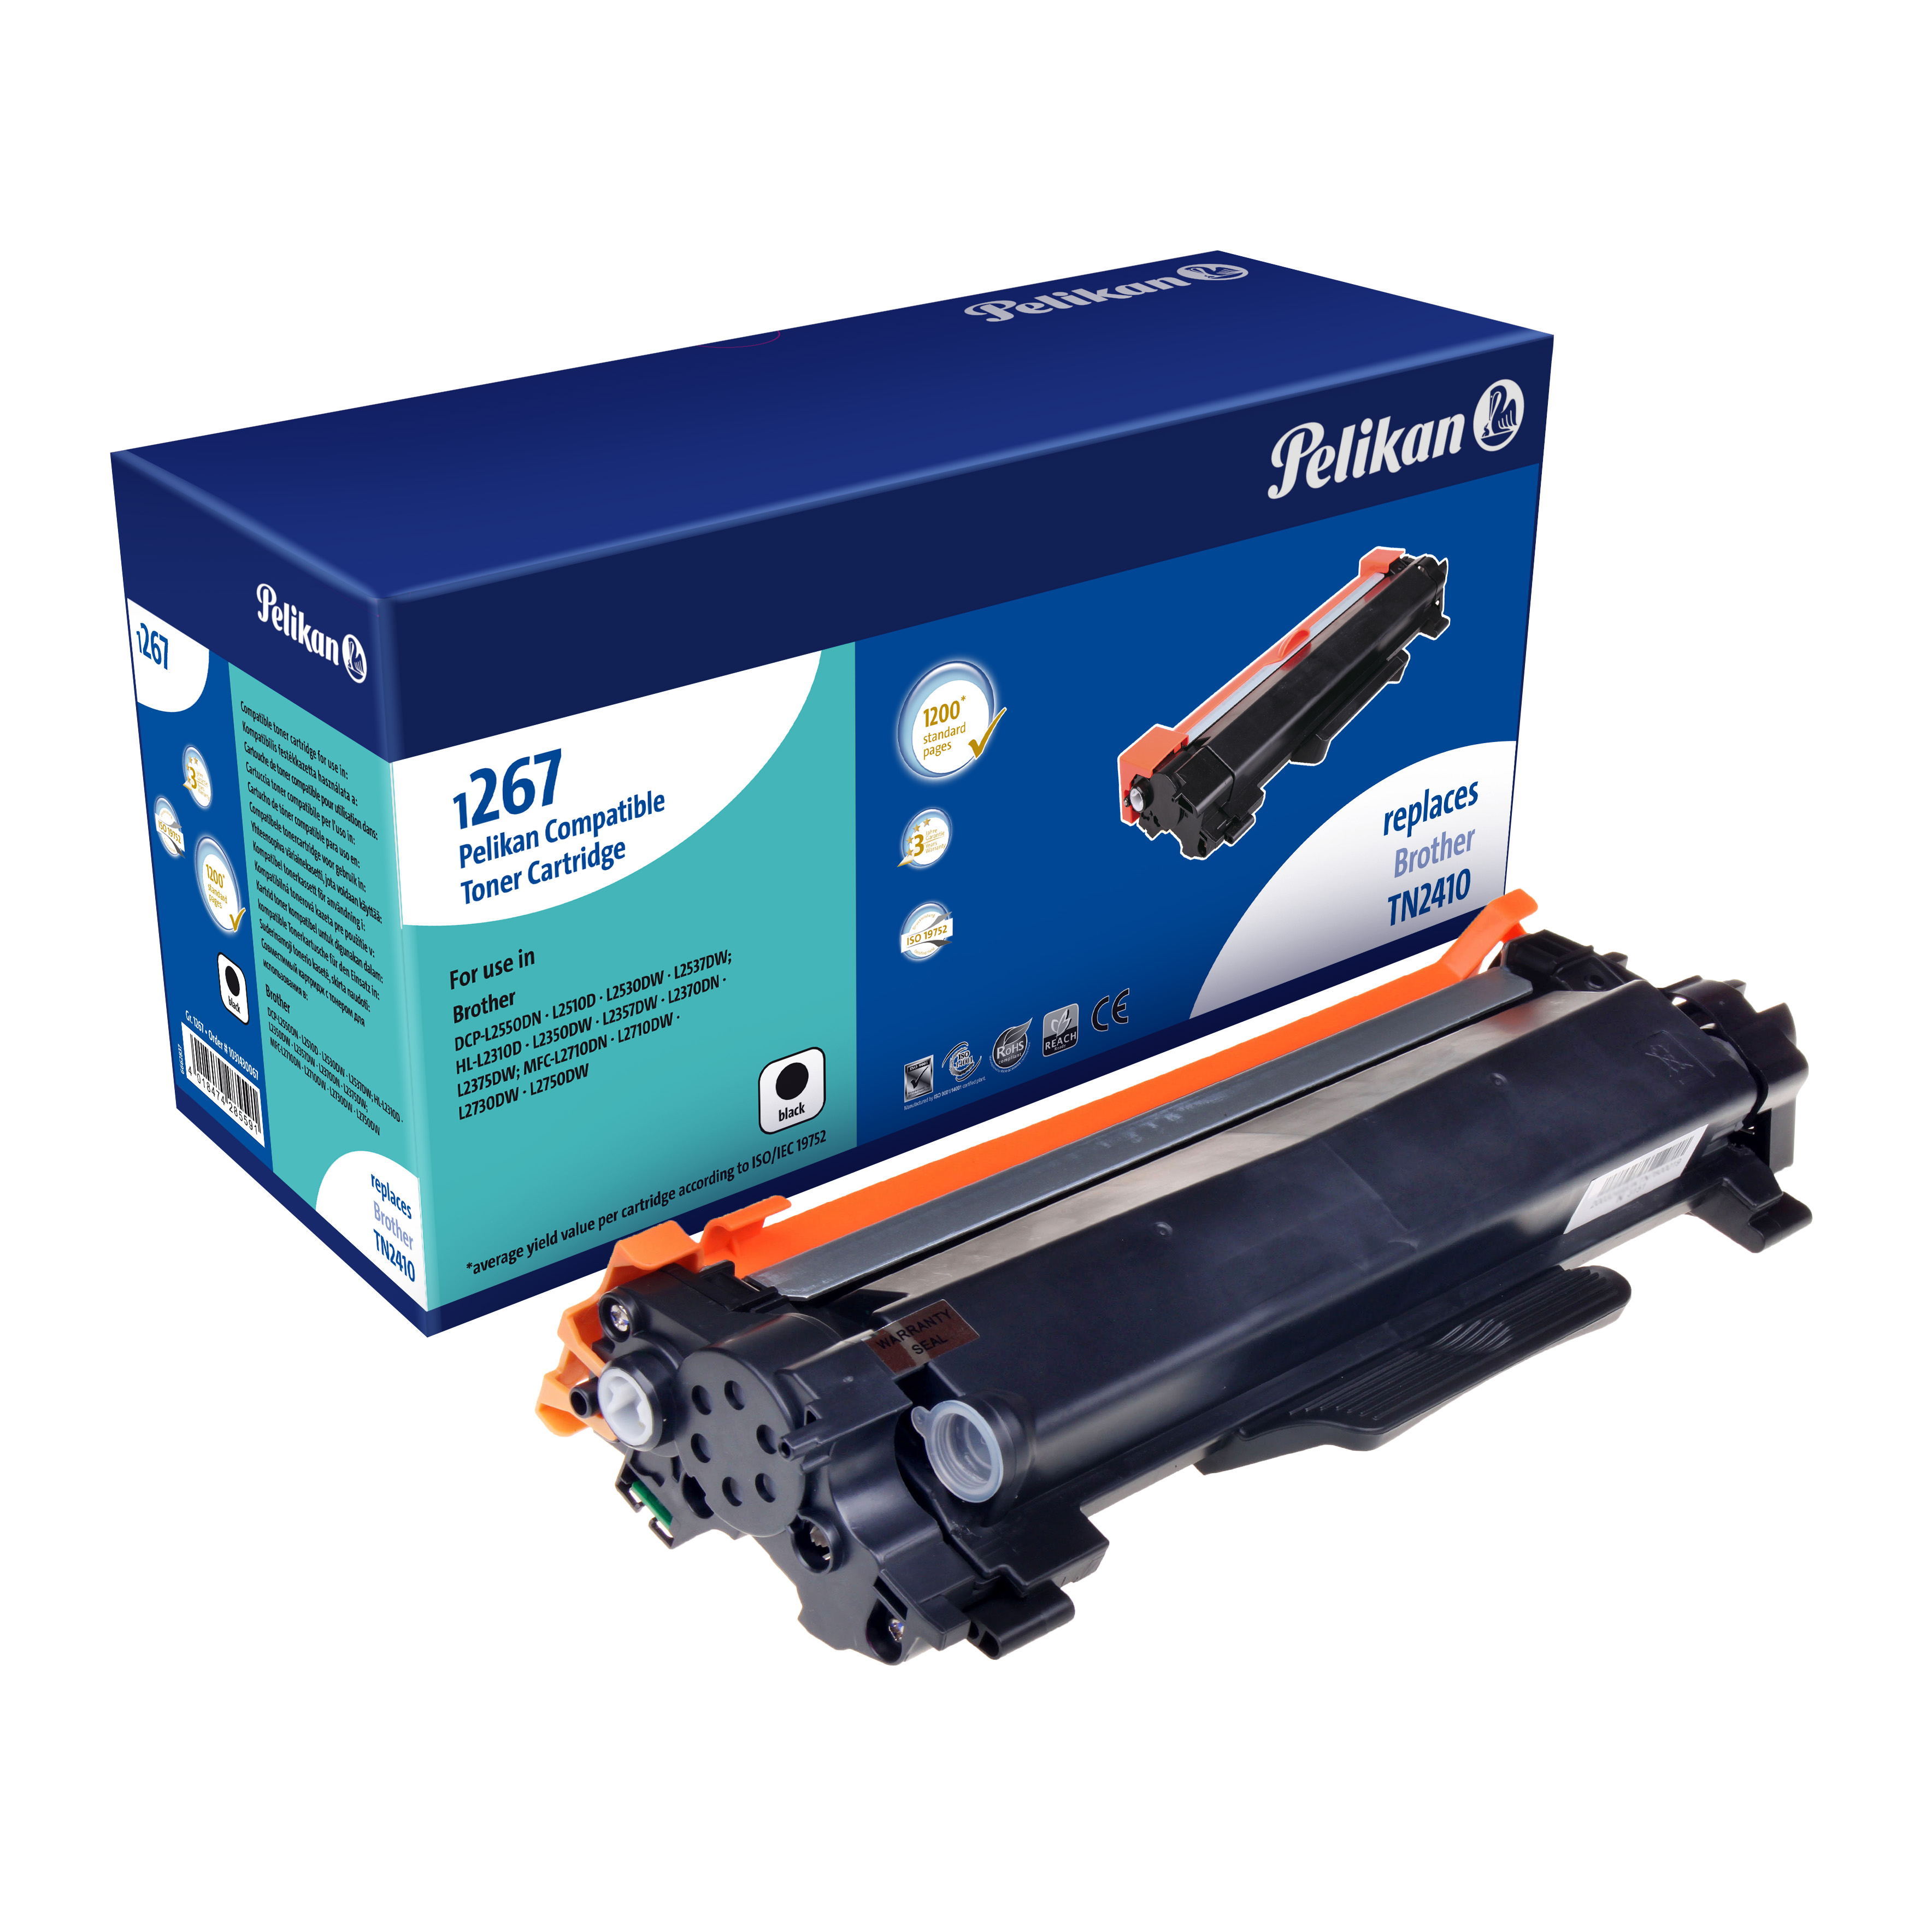 Compatible to Brother TN-2410 Toner Cartridge, black buy cheap